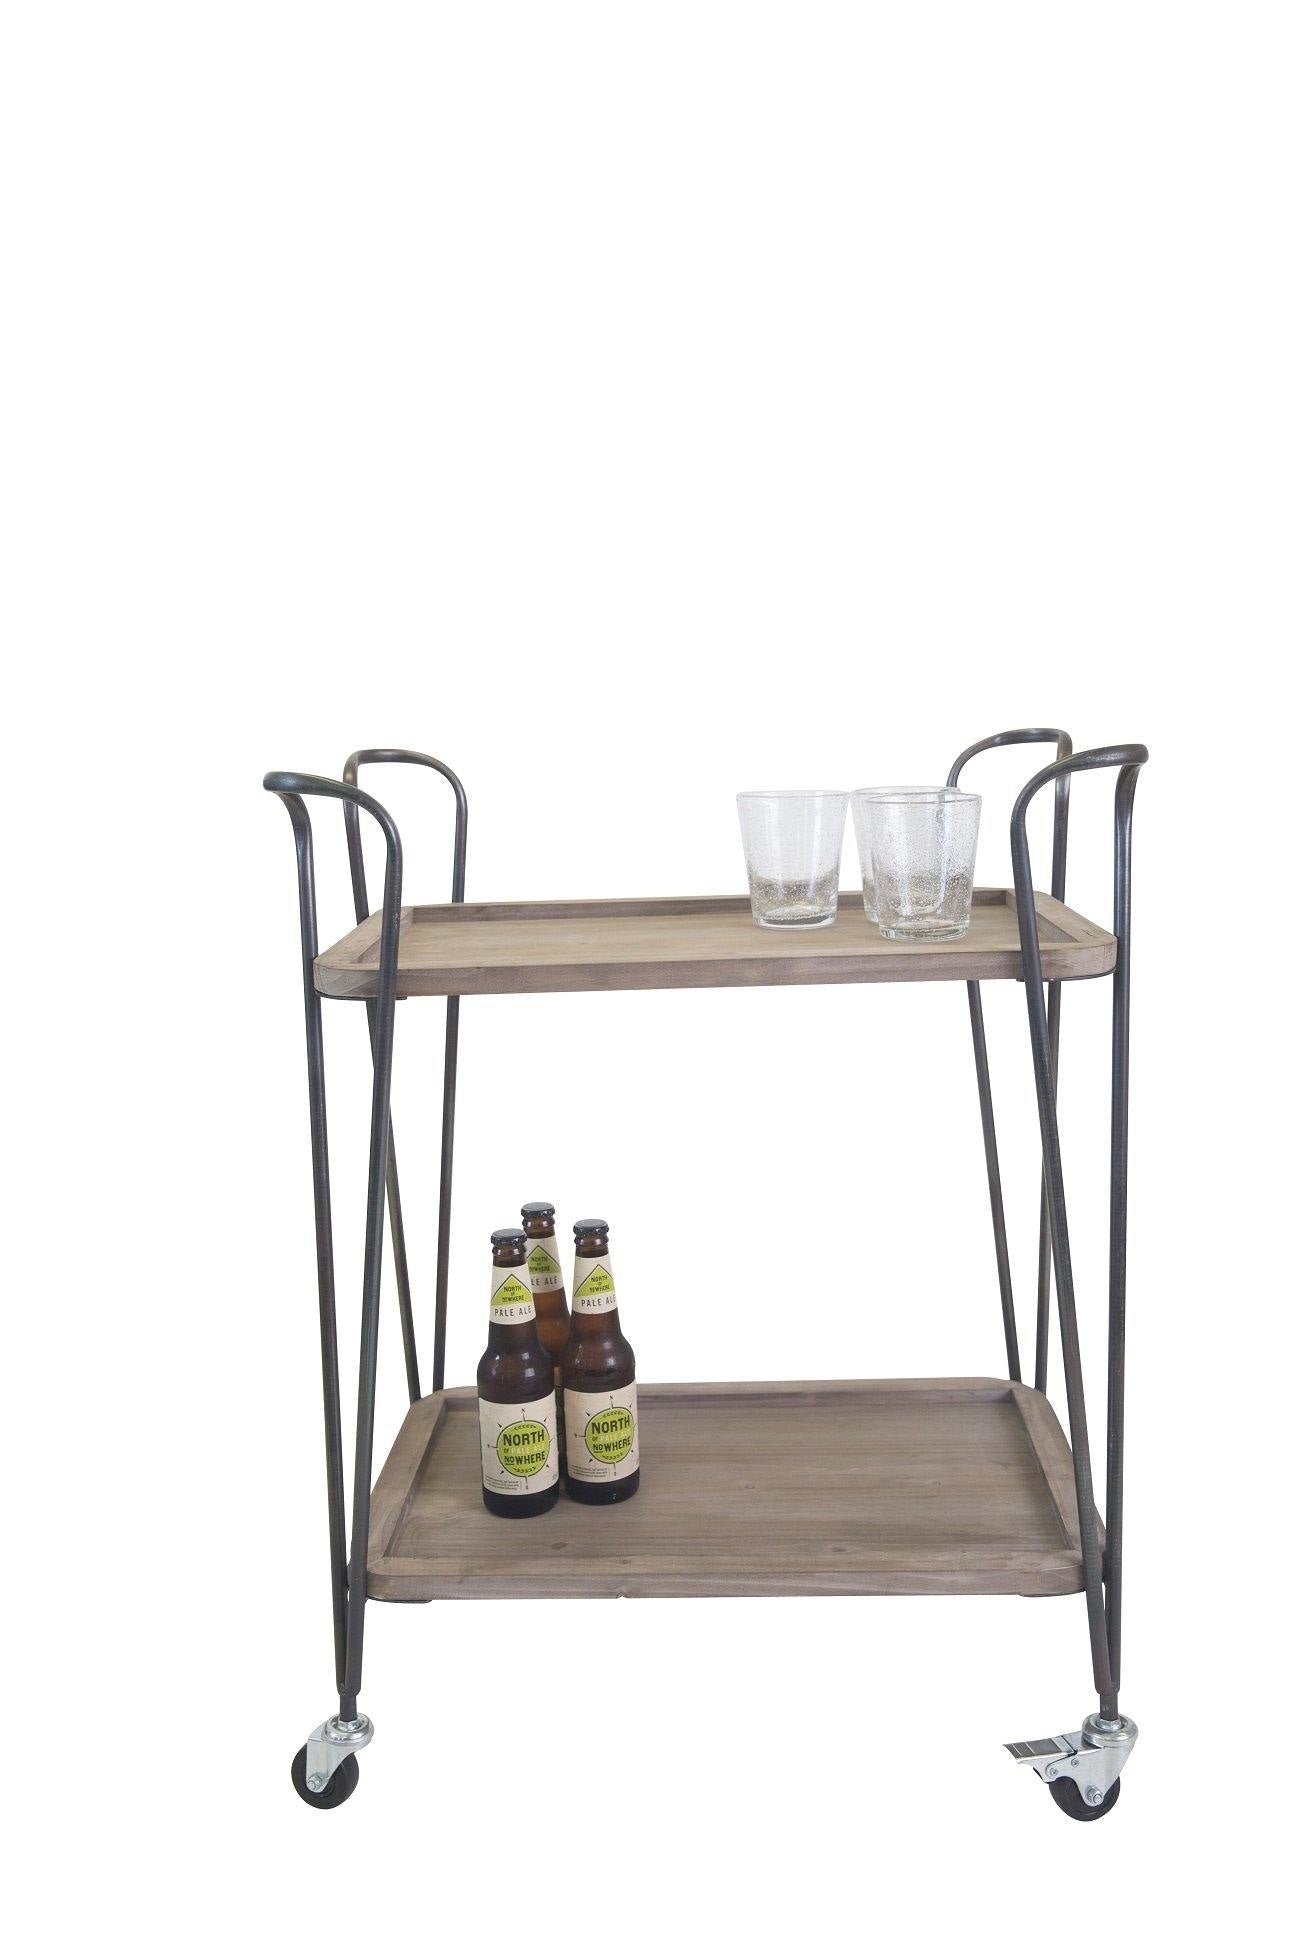 Solid Fir Wood Top Industrial Stylish 2 Tier Shelves Drinks 